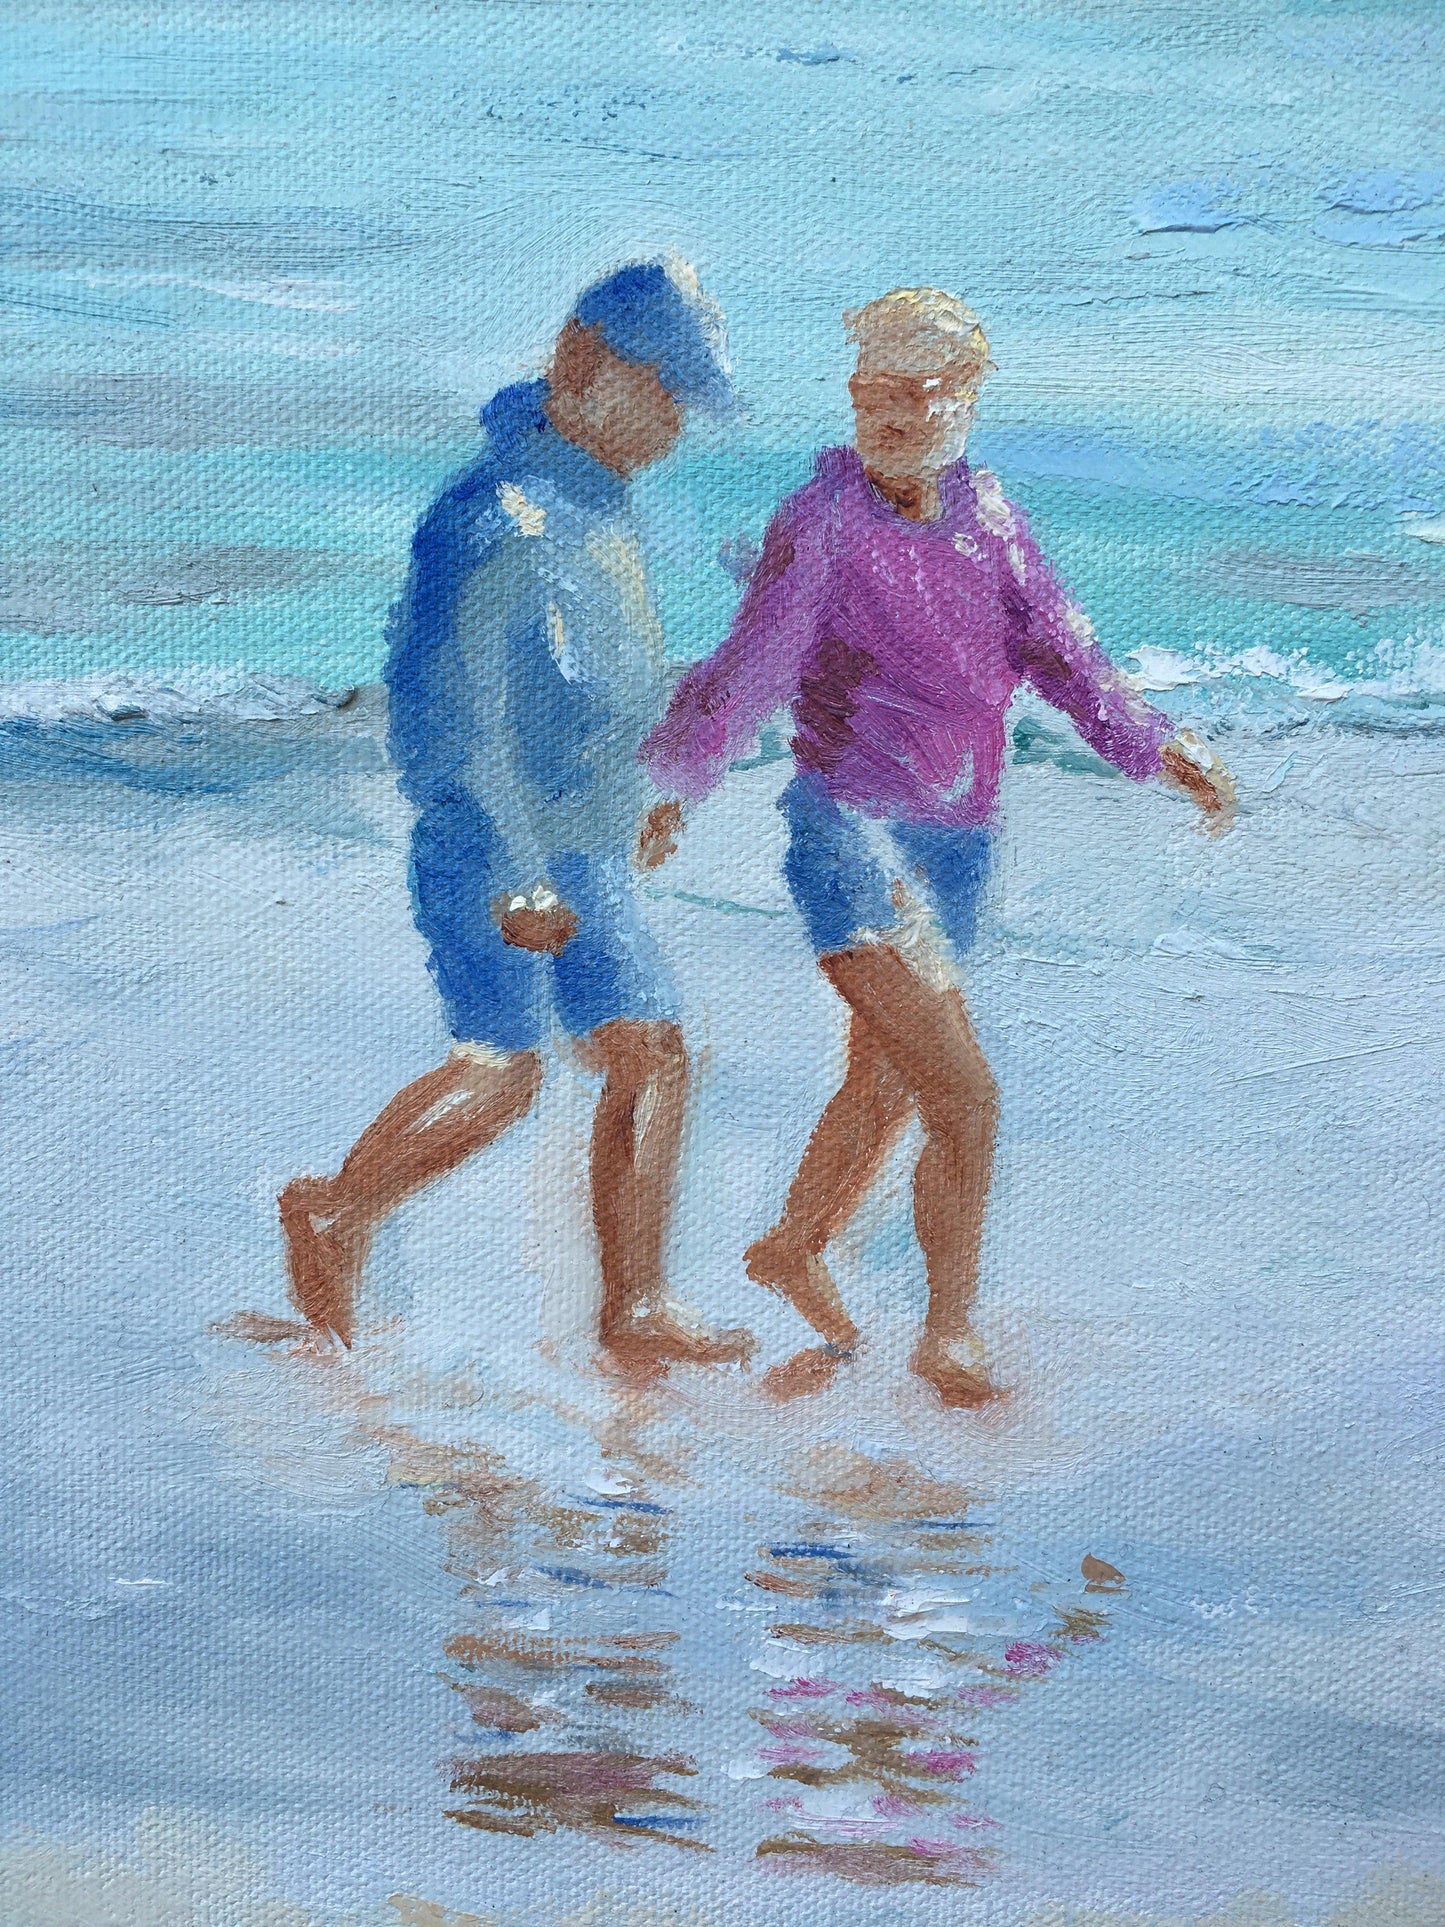  Close up of oil painting of A Walk on the Wharf oil paintingSt Ives, Cornwall - lorrainefield